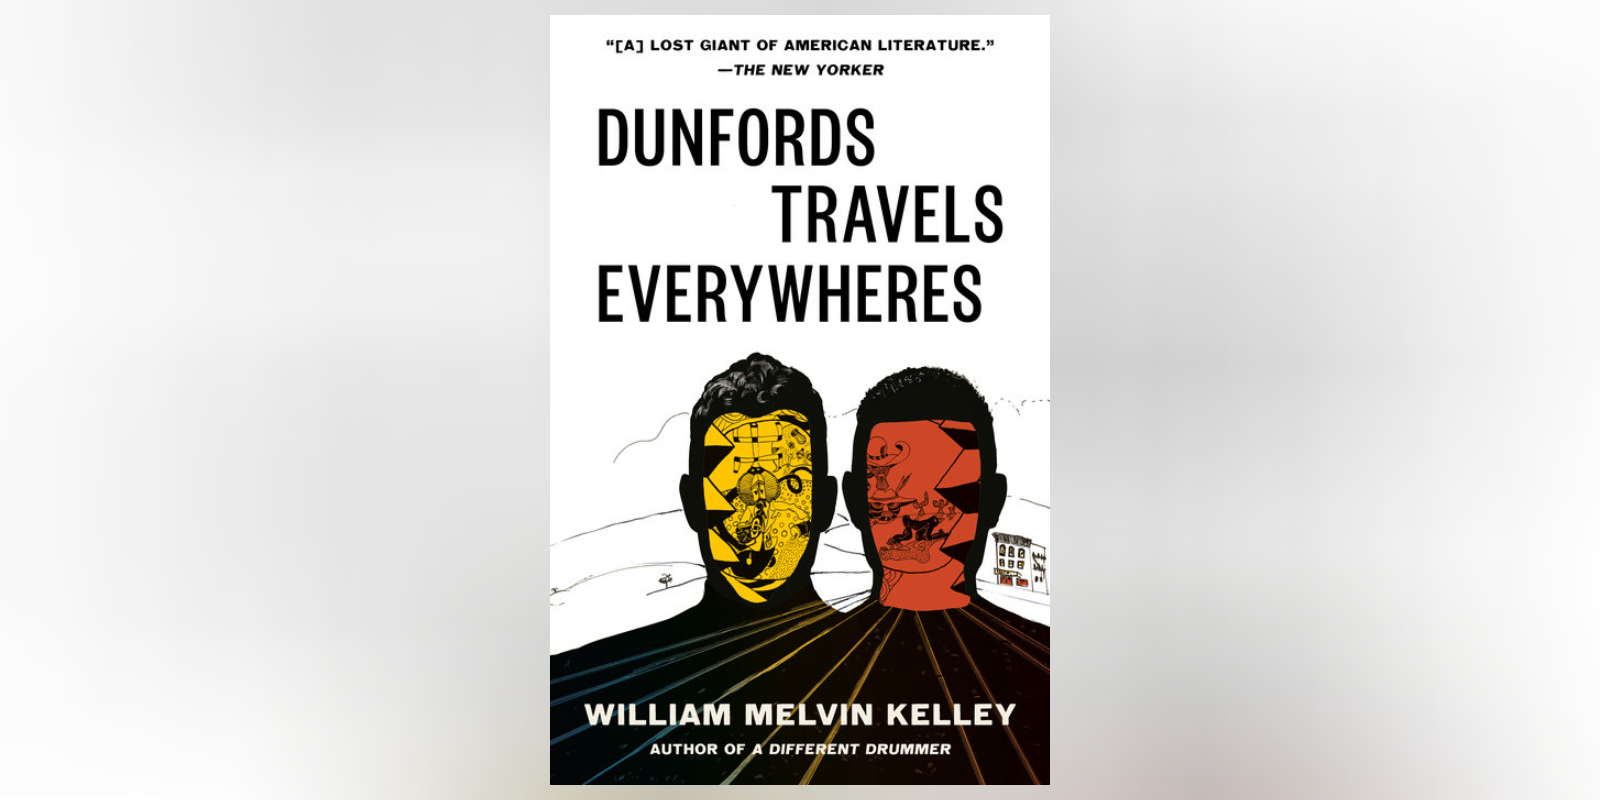 William Melvin Kelley is awarded the American Book Award for DUNFORDS TRAVELS EVERYWHERES